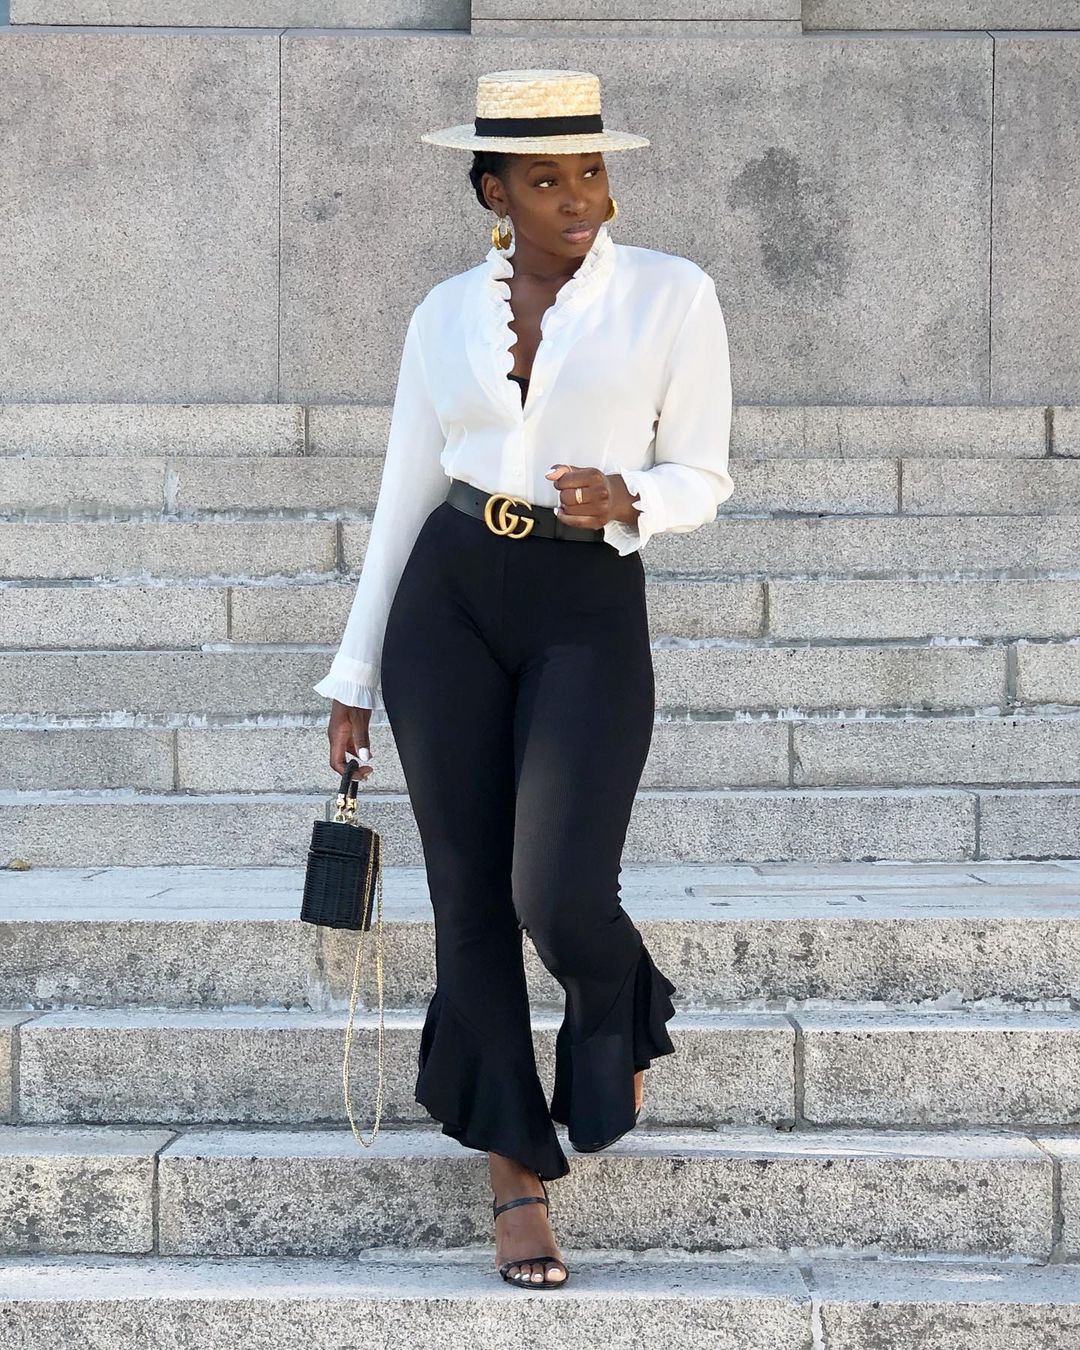 Nara Pereira is Effortlessly Chic 7 Days a Week! | BN Style